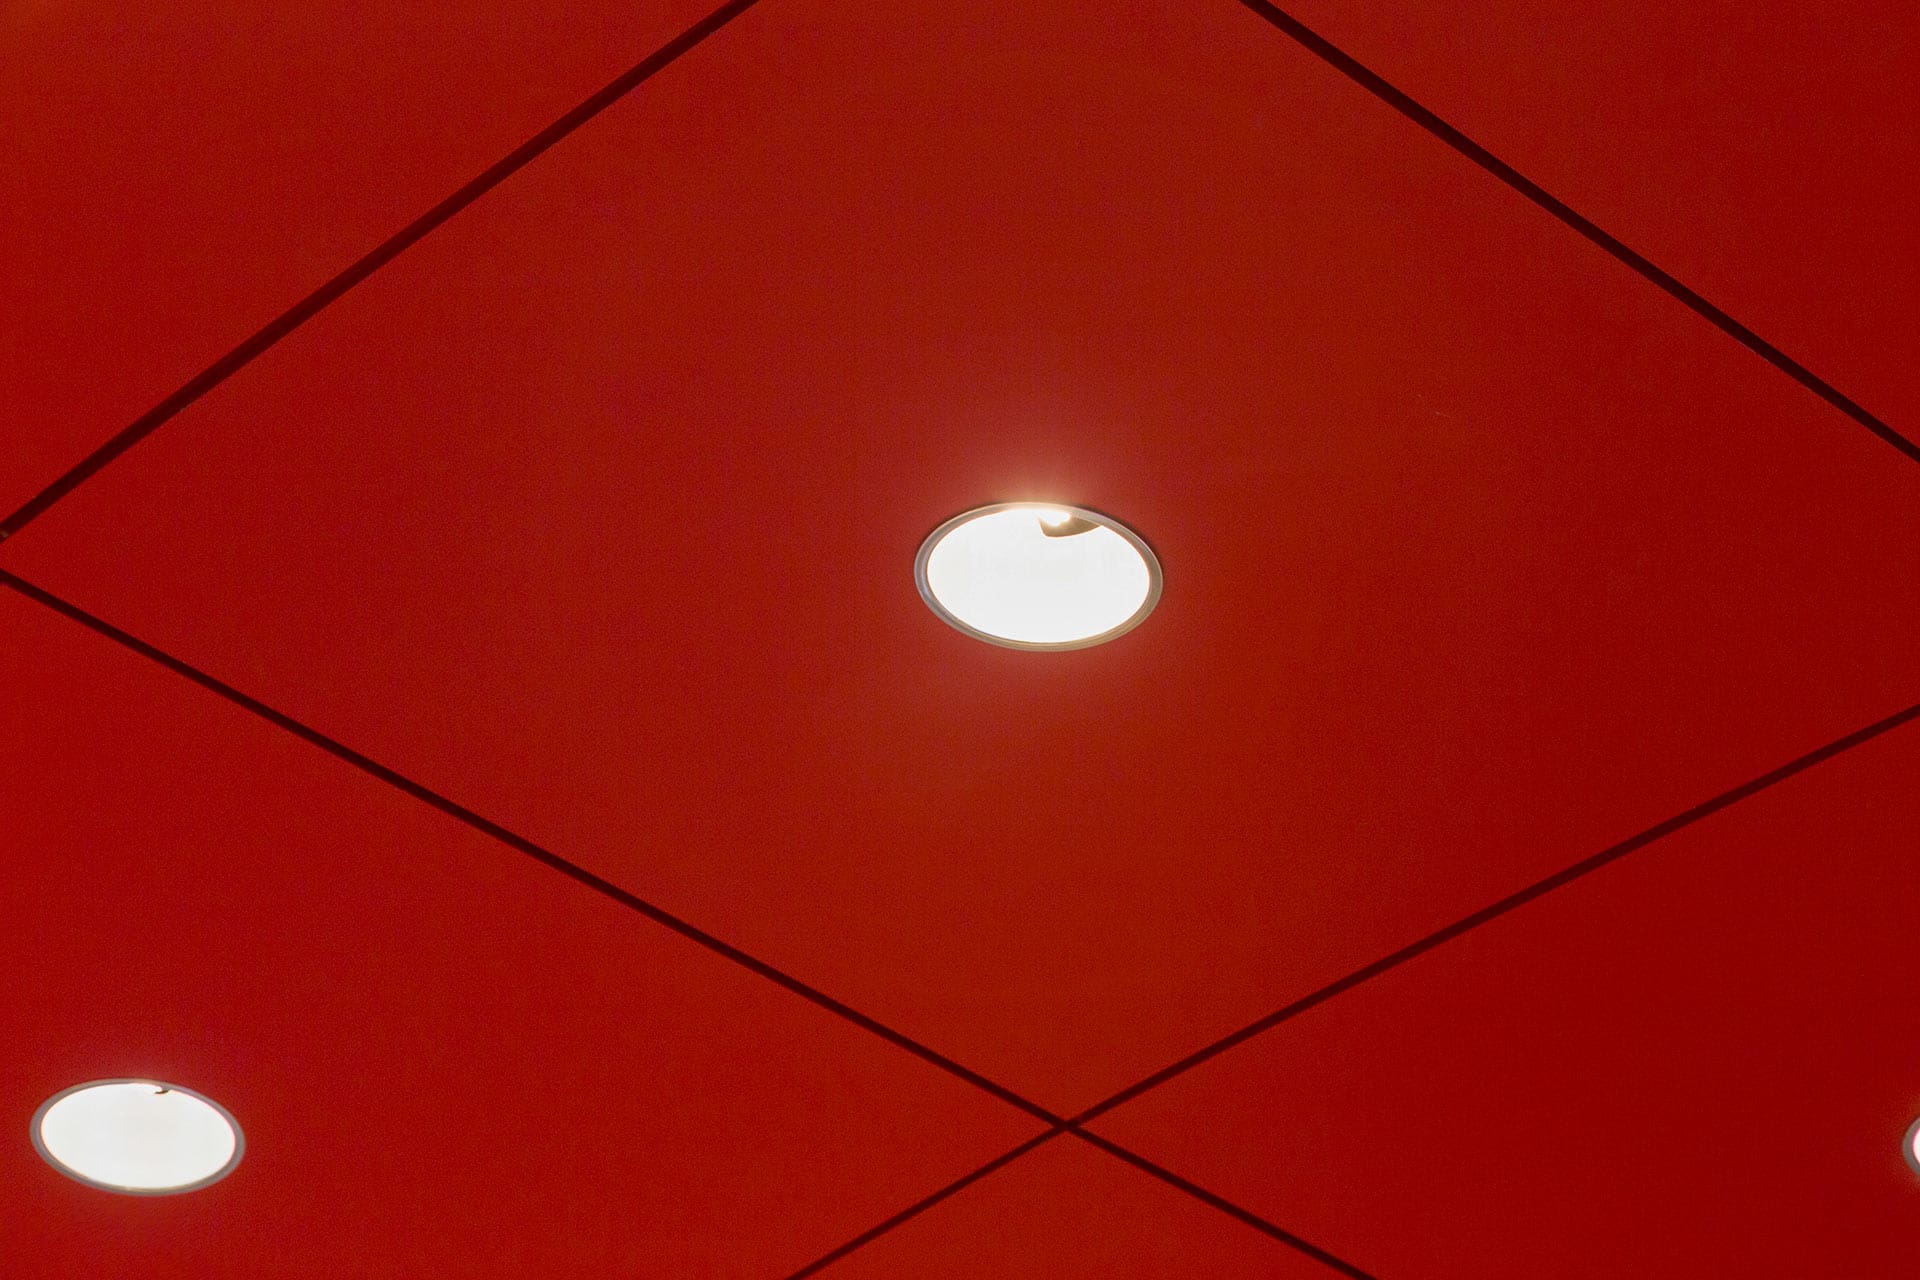 Detail of the recessed lighting system detailed in the aluminum canopy's interior ceiling panels.